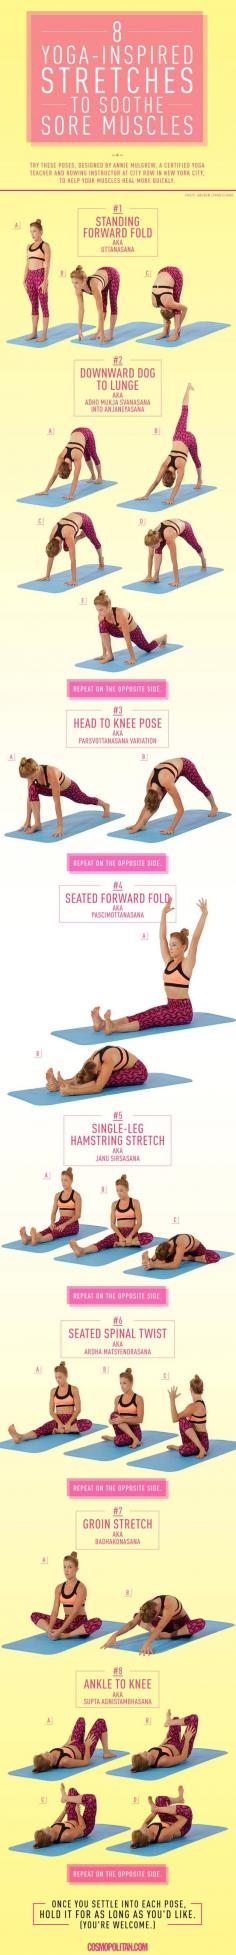 
                    
                        Yoga Stretches for Sore Muscles by cosmopolitan: When you work out, your muscles contract and shorten, which can leave you feeling stiff. Stretching increases blood flow to the muscles to relieve this stiffness, lengthen muscles, and improve your flexibility for a greater range of motion (and lower risk of injury) the next time you work out... #Yoga_Stretches #Sore_Muscles
                    
                